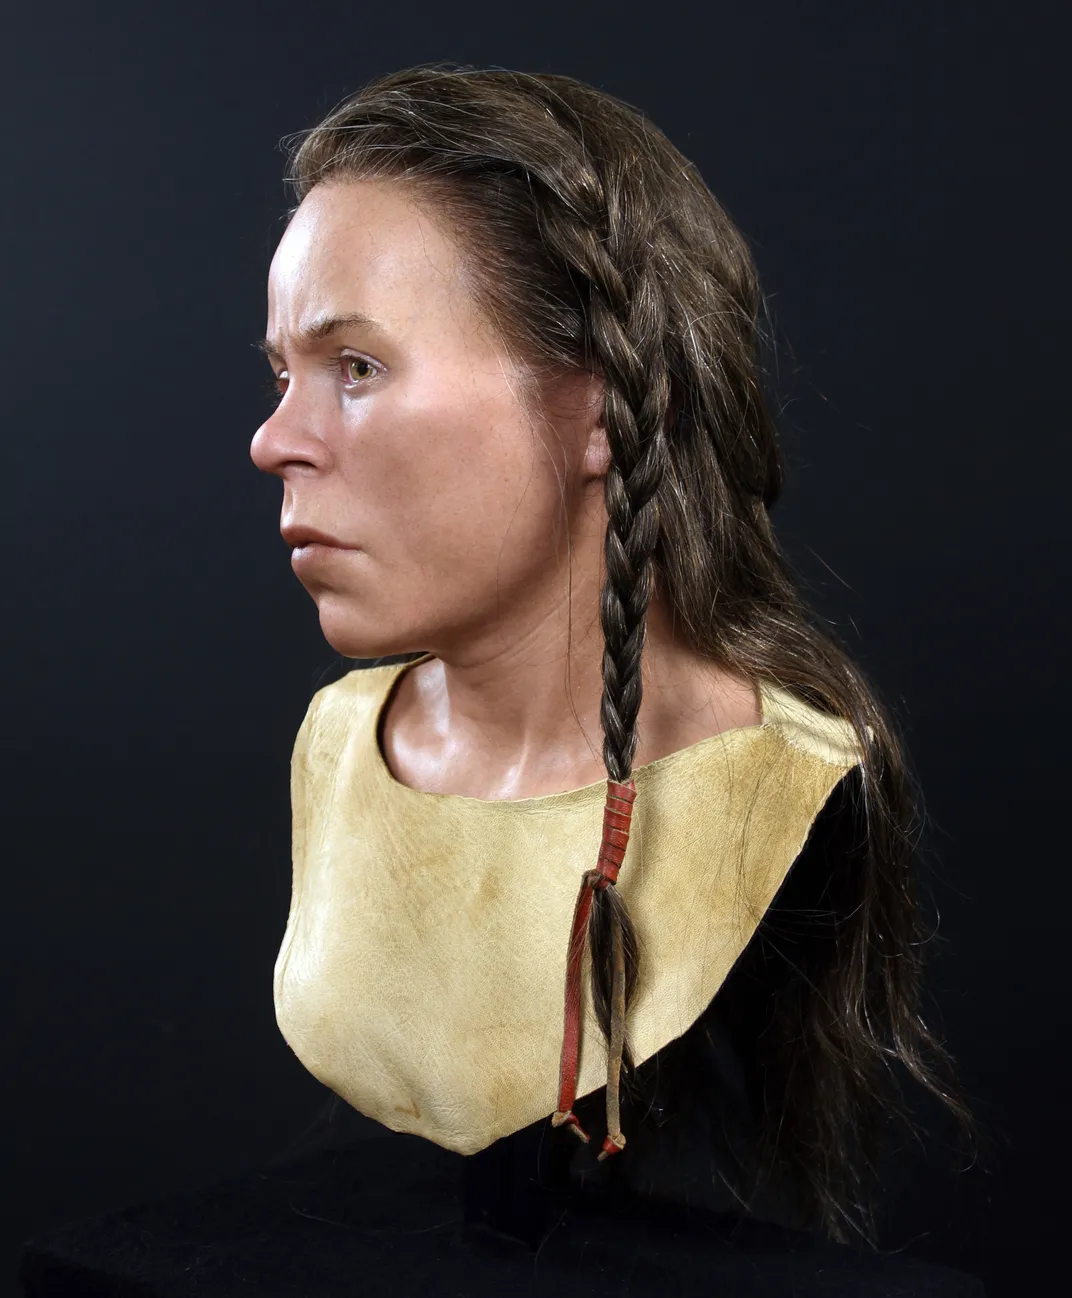 See the Face of a Bronze Age Woman Who Lived in Scotland 4,000